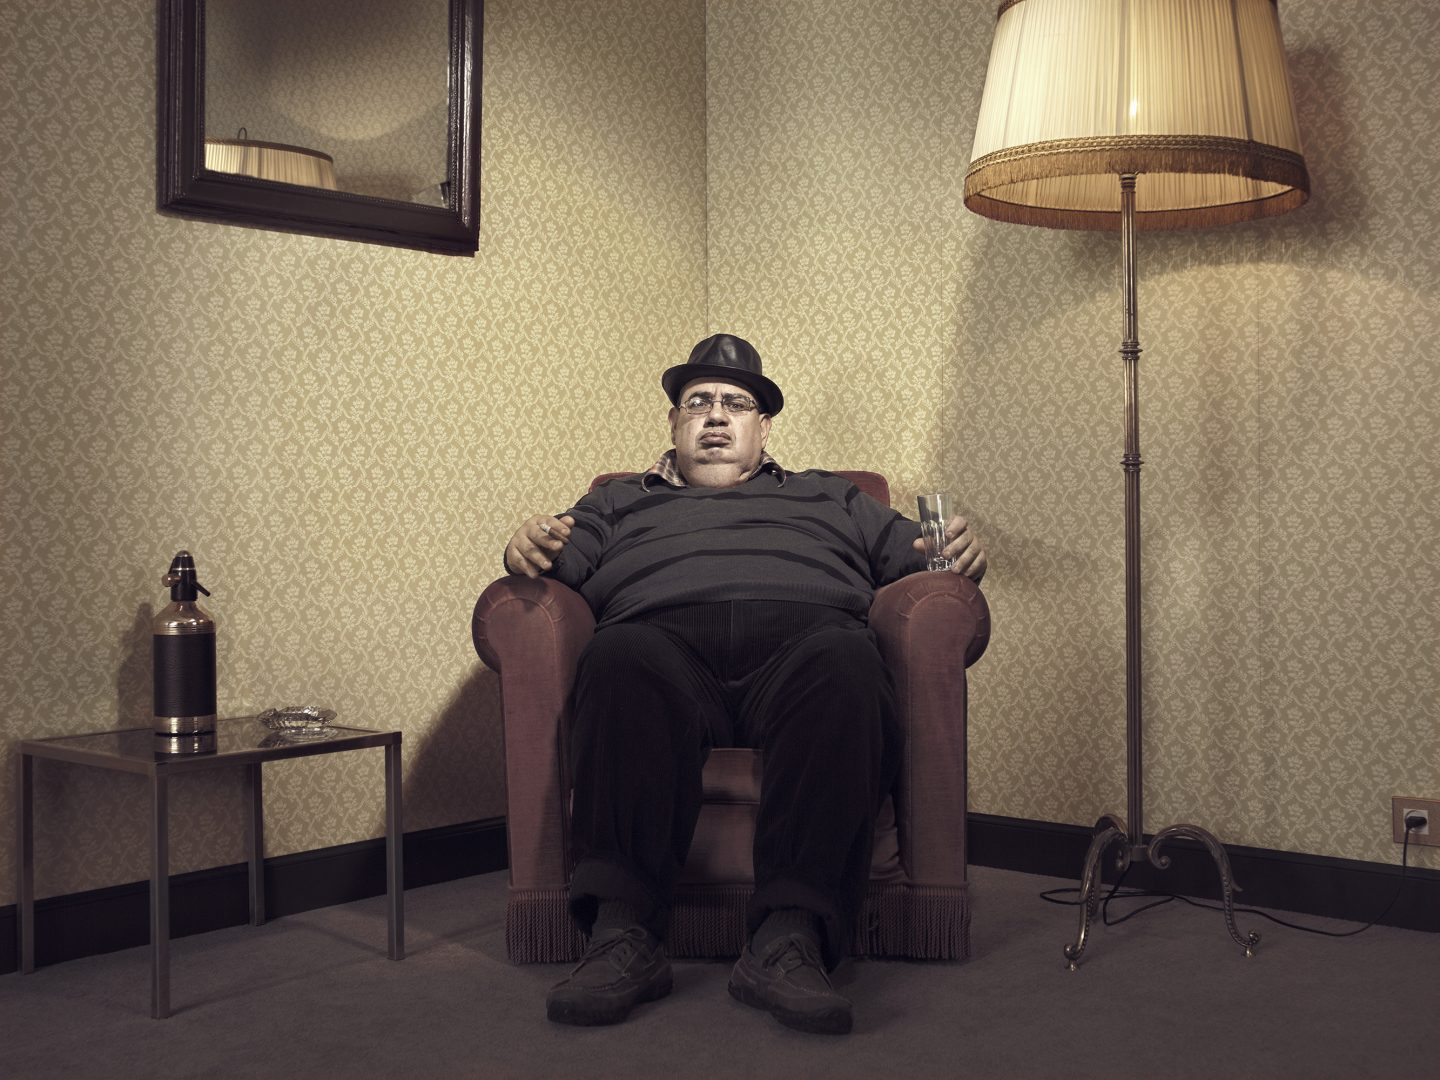 Man with hat sitting in armchair in room 42 by Stefan Rappo